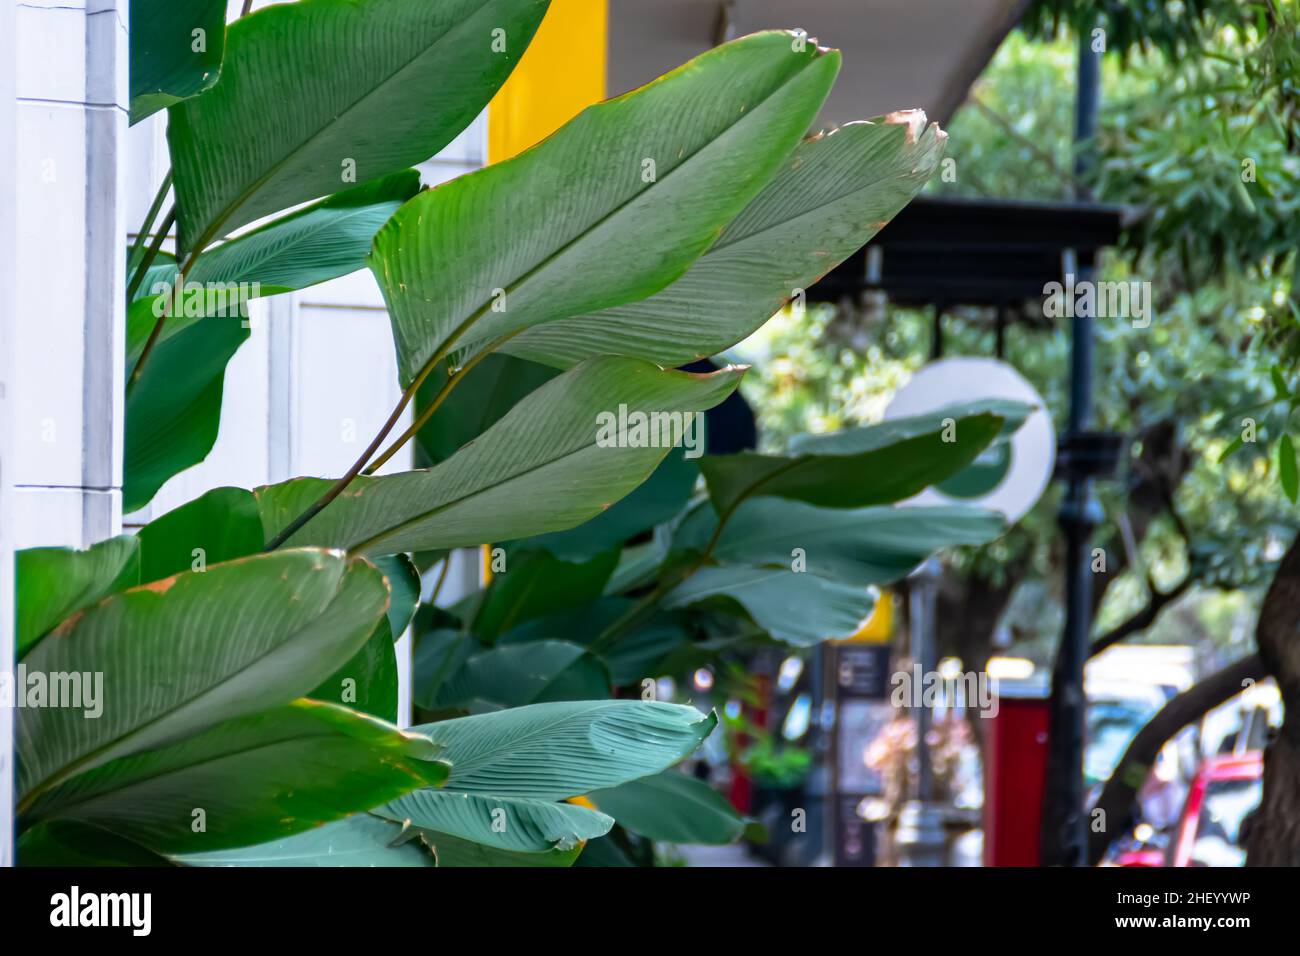 Exotic green tropical banana leaves decorated on the city pavement Stock Photo